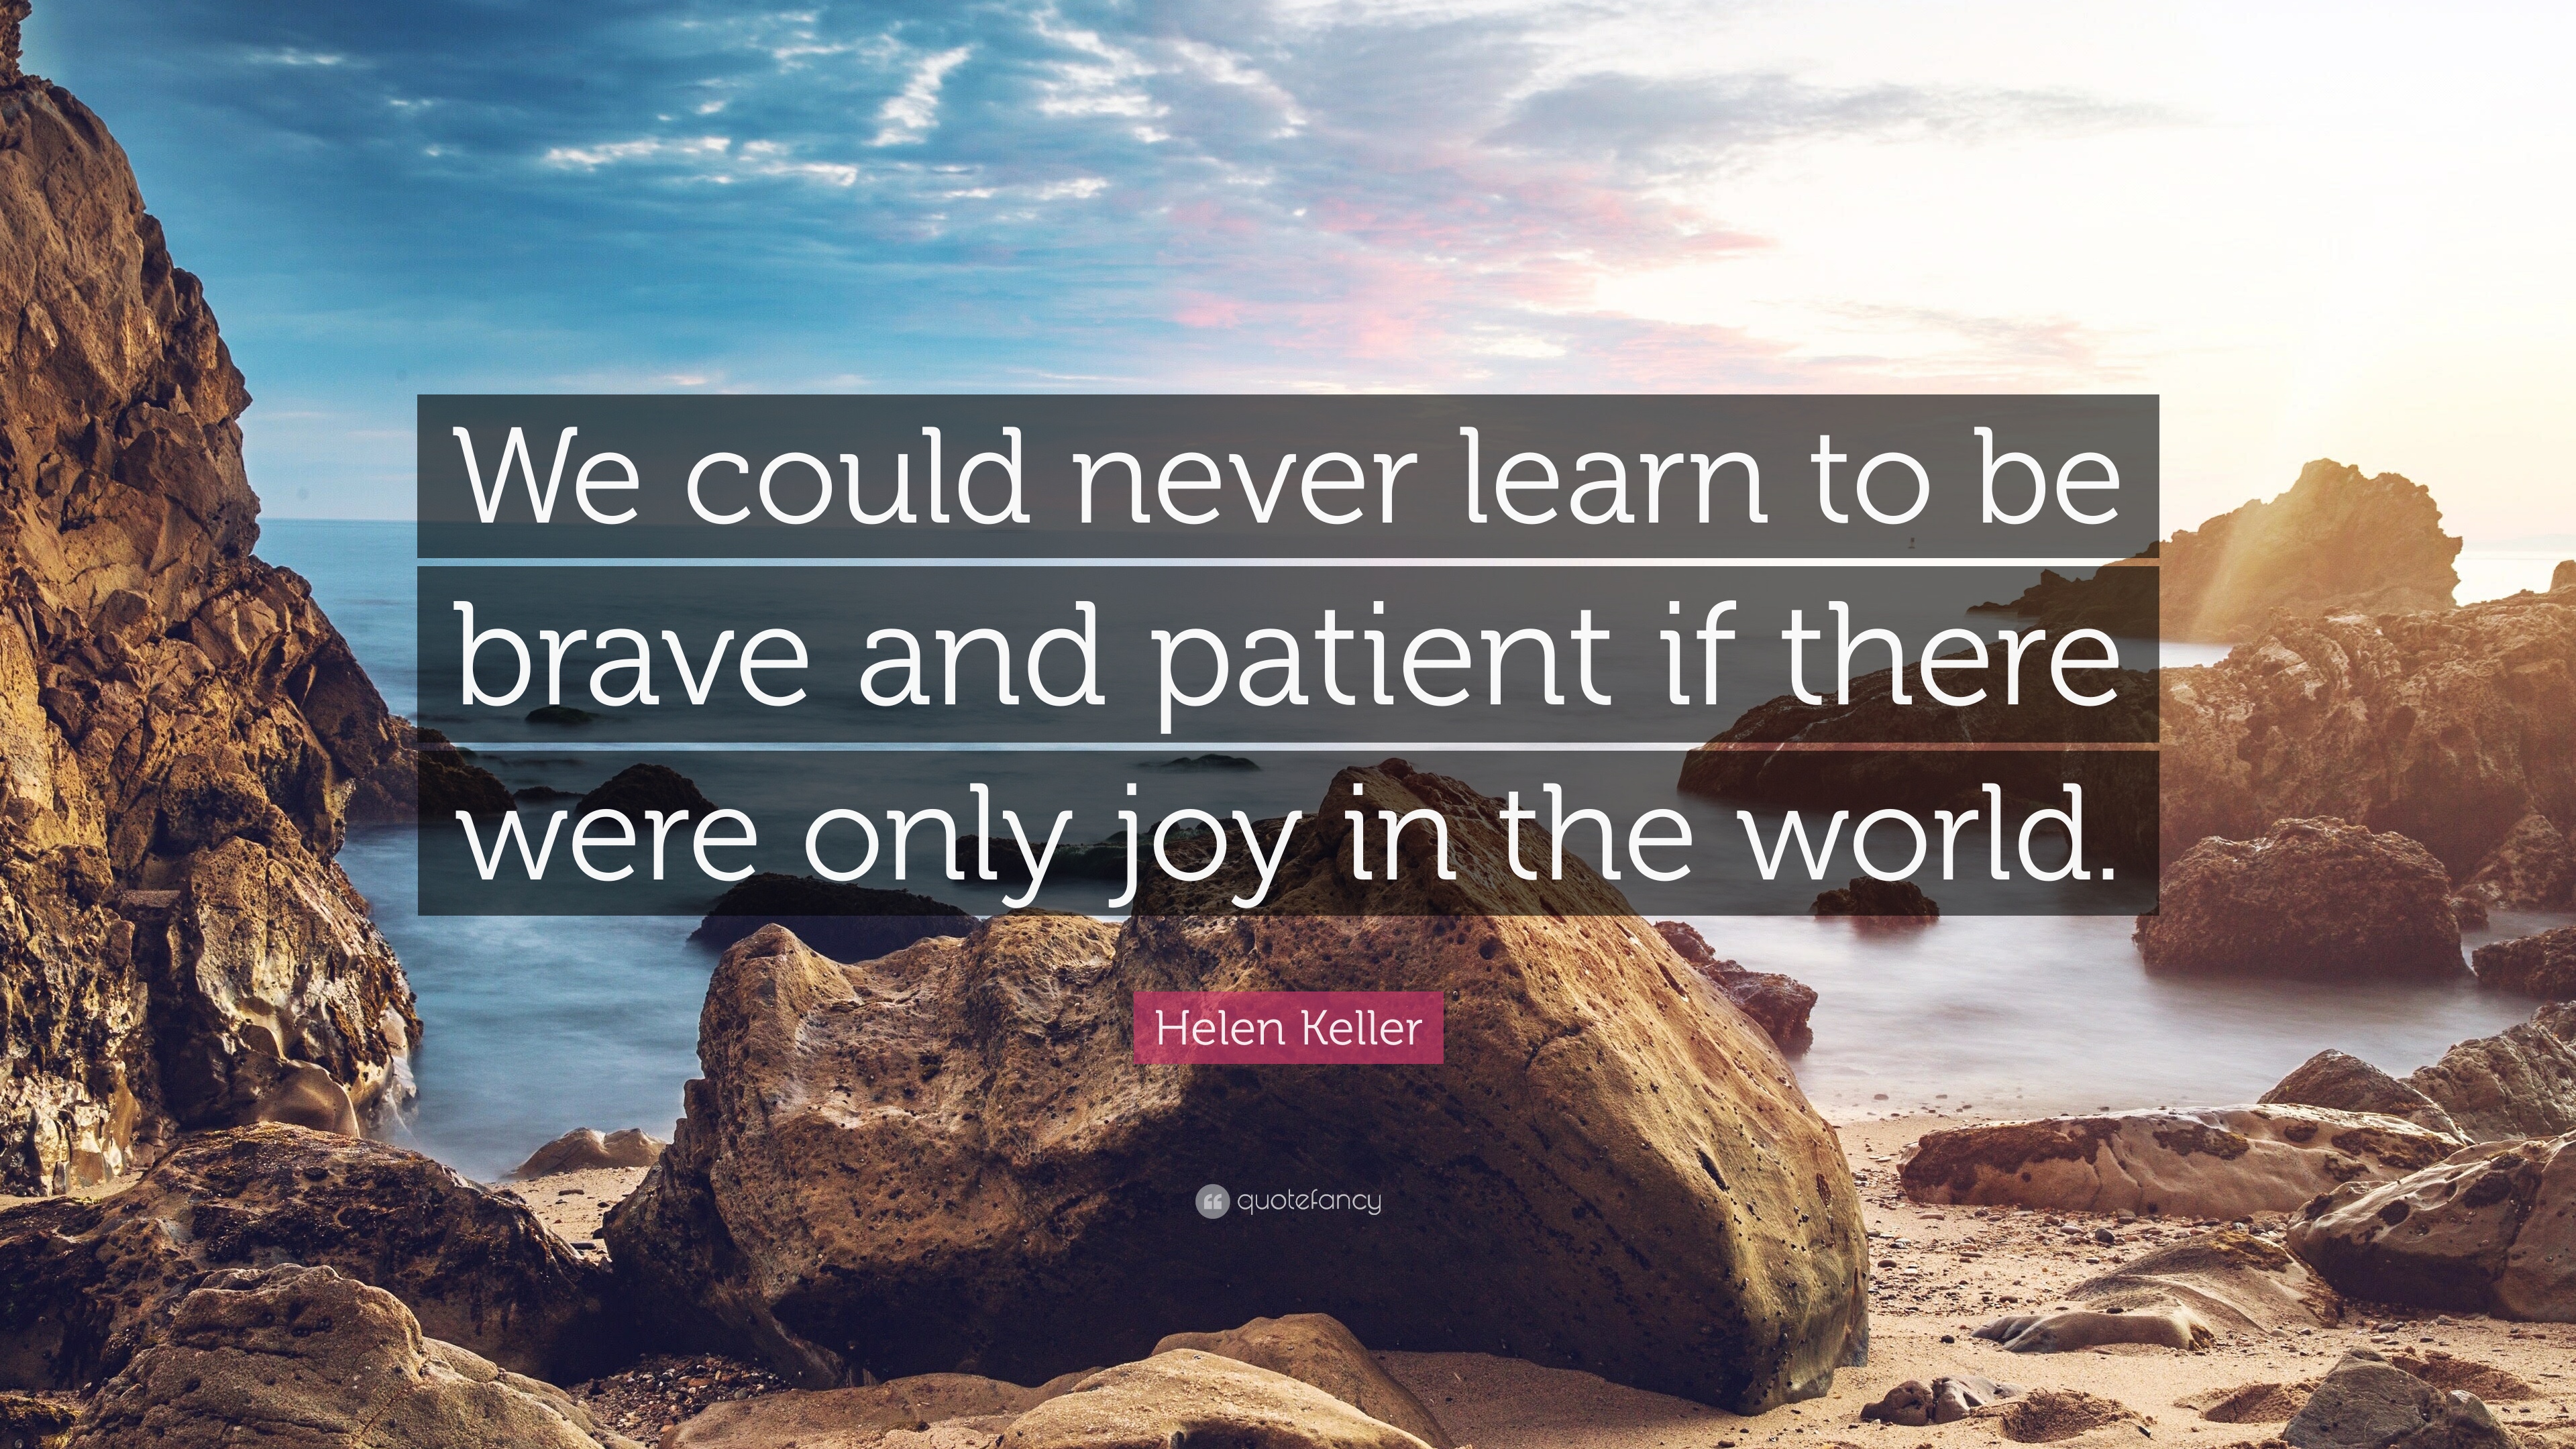 1708455 helen keller quote we could never learn to be brave and patient if